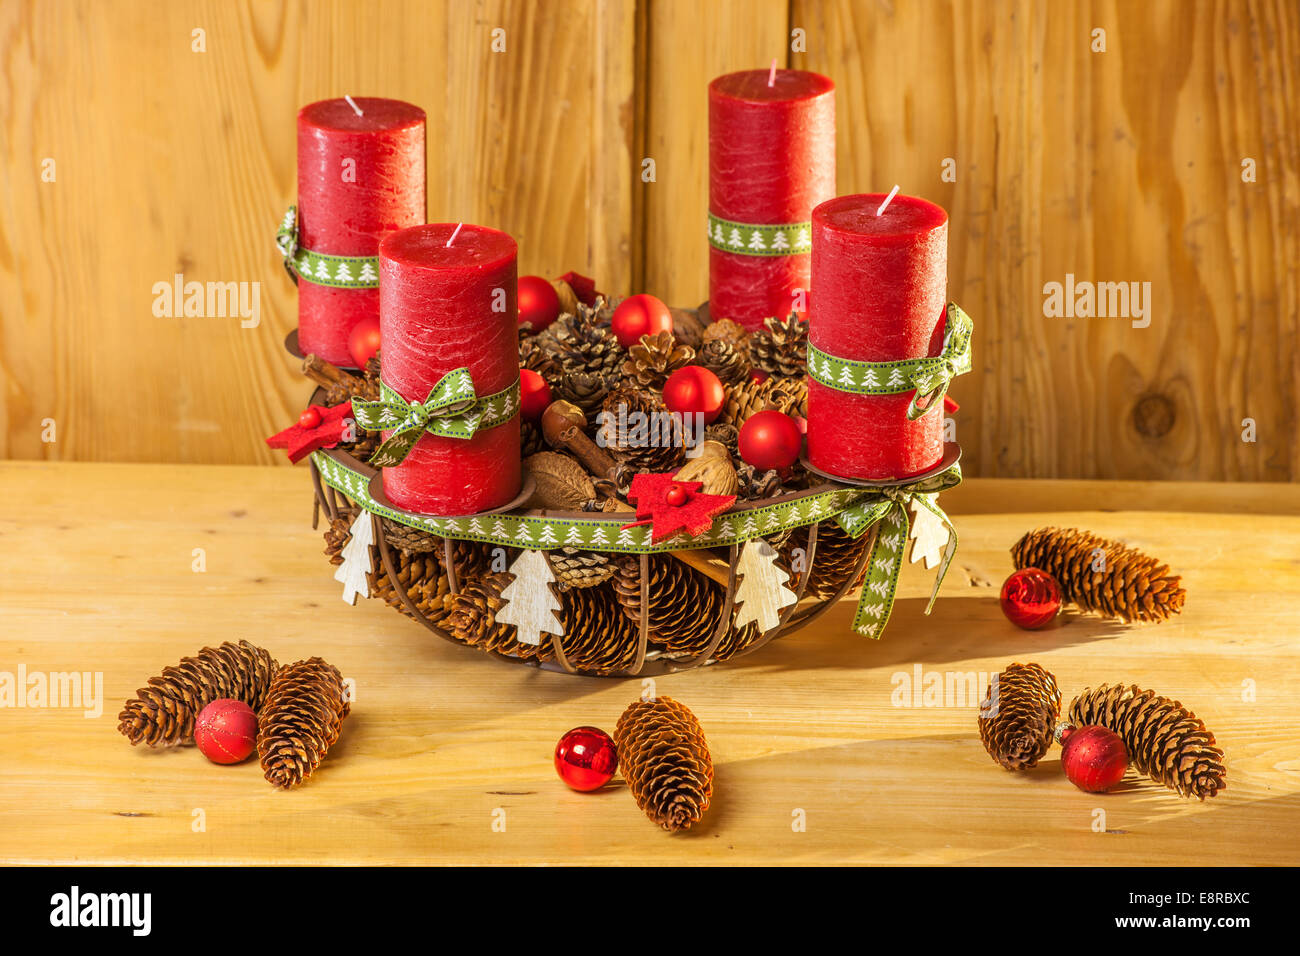 Advent wreath with red candles in country style Stock Photo